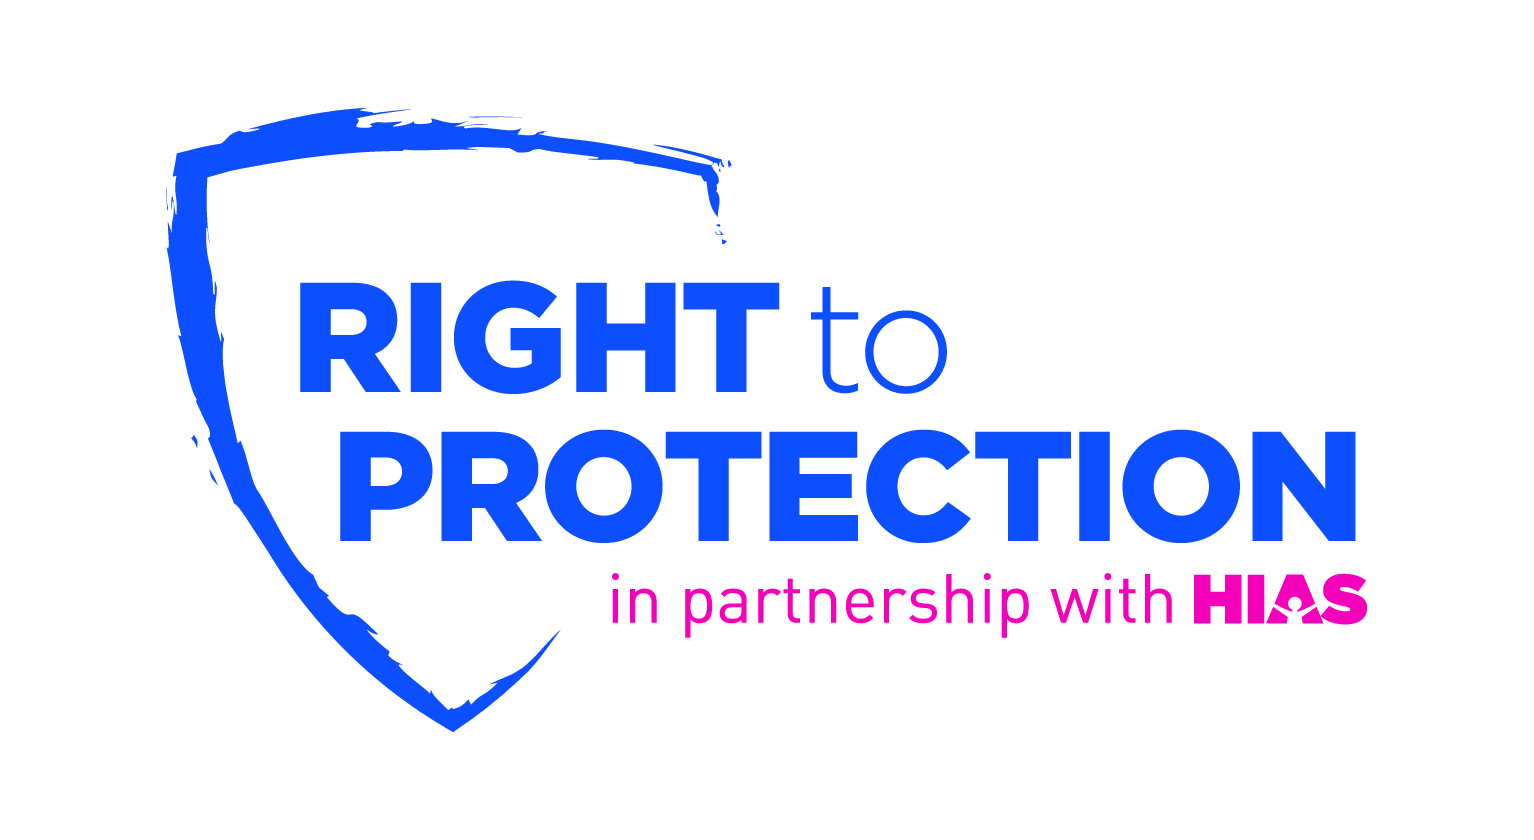 RIGHT TO PROTECTION